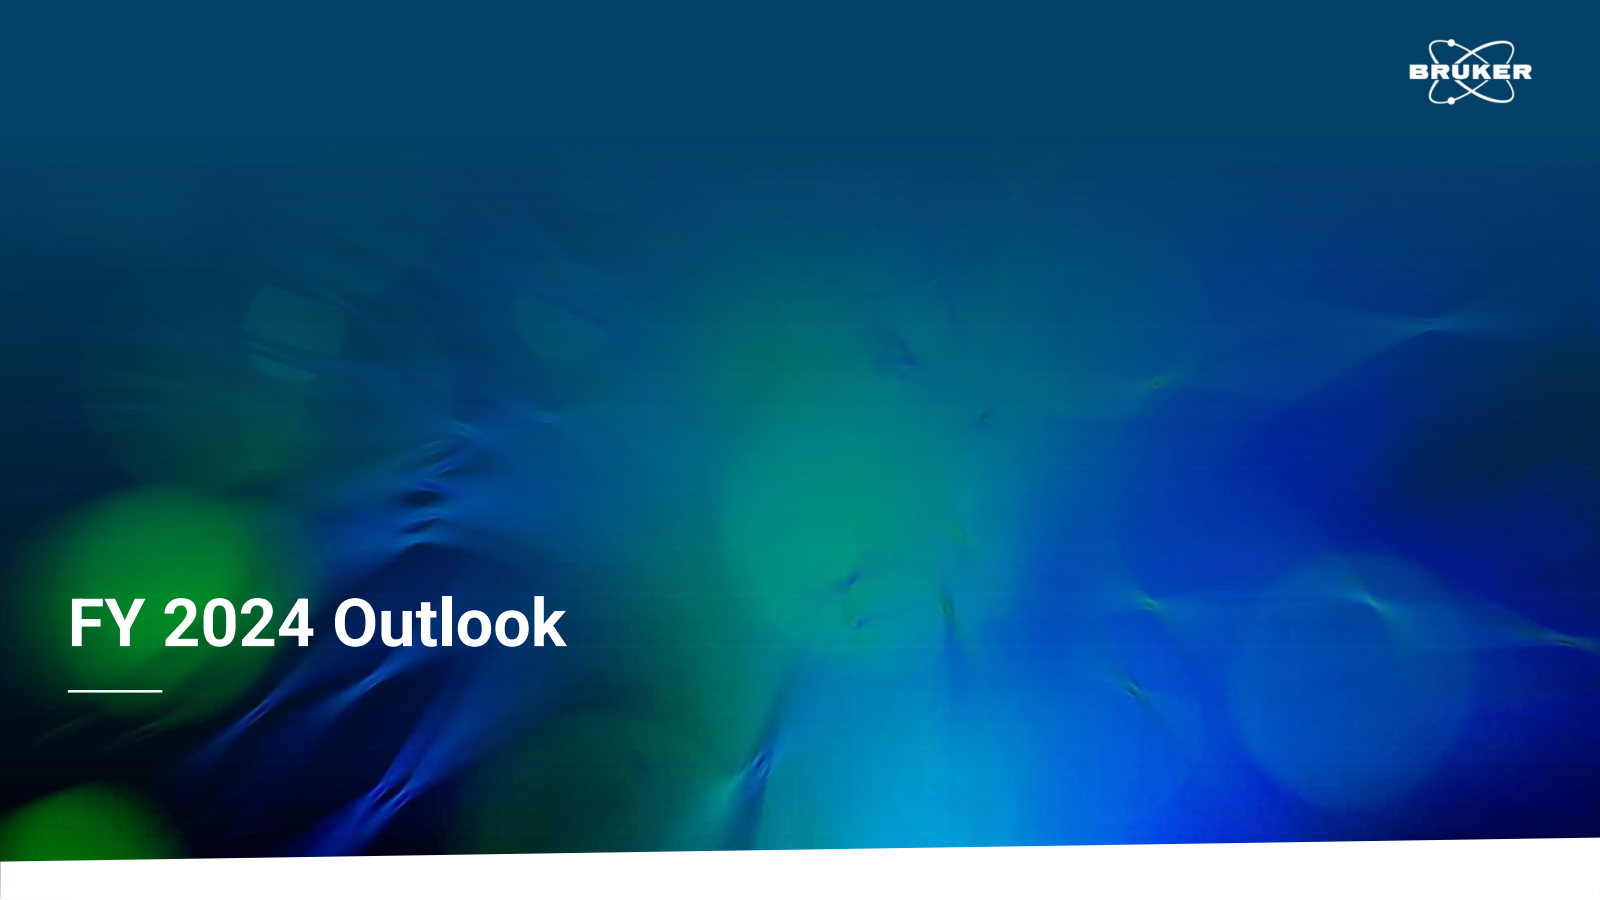 FY 2024 Outlook 

BR